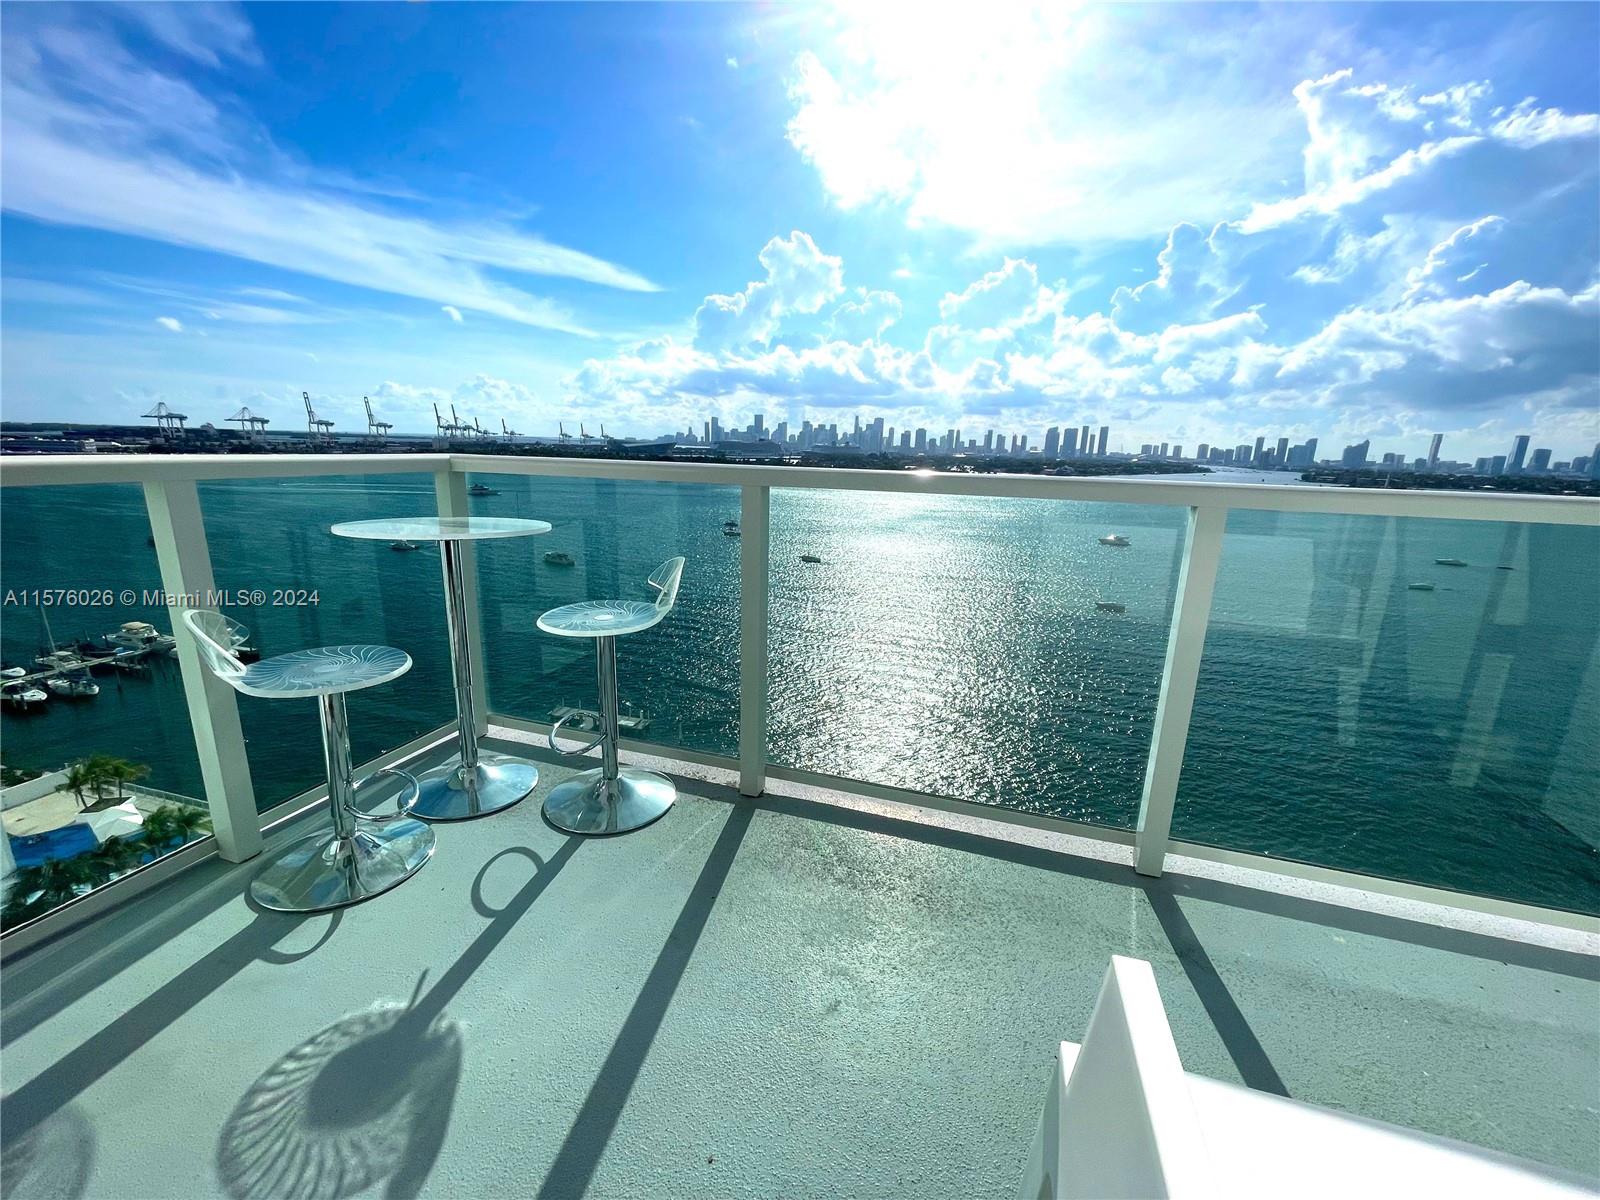 Spectacular Bay views from this Stunning 2/2 corner unit fully remodeled with w/high-end materials and equipment: mother-of-pearl stones, marble floors, Viking appliances. Fully equipped with the finest high-style furniture. Enjoy al fresco cocktails & dining while enjoying magnificent sunset views. Rent includes water, High Speed internet, HD cable. Additional Amenities; 24-hour valet parking, 5,000-square-foot fitness center, sauna, 24-hour security, convenience store, beauty salon. Also, next to Whole foods, within a short walk from FLAMINGO PARK (Pool, Bark Park, Running Track, Tennis, Playground...), Trader's Joe, Publix Supermarket & shops. Short drive away from Downtown, Arts & Entertainment District, Bayside Marketplace, Brickell. Lease for minimum 6 months up to one year.